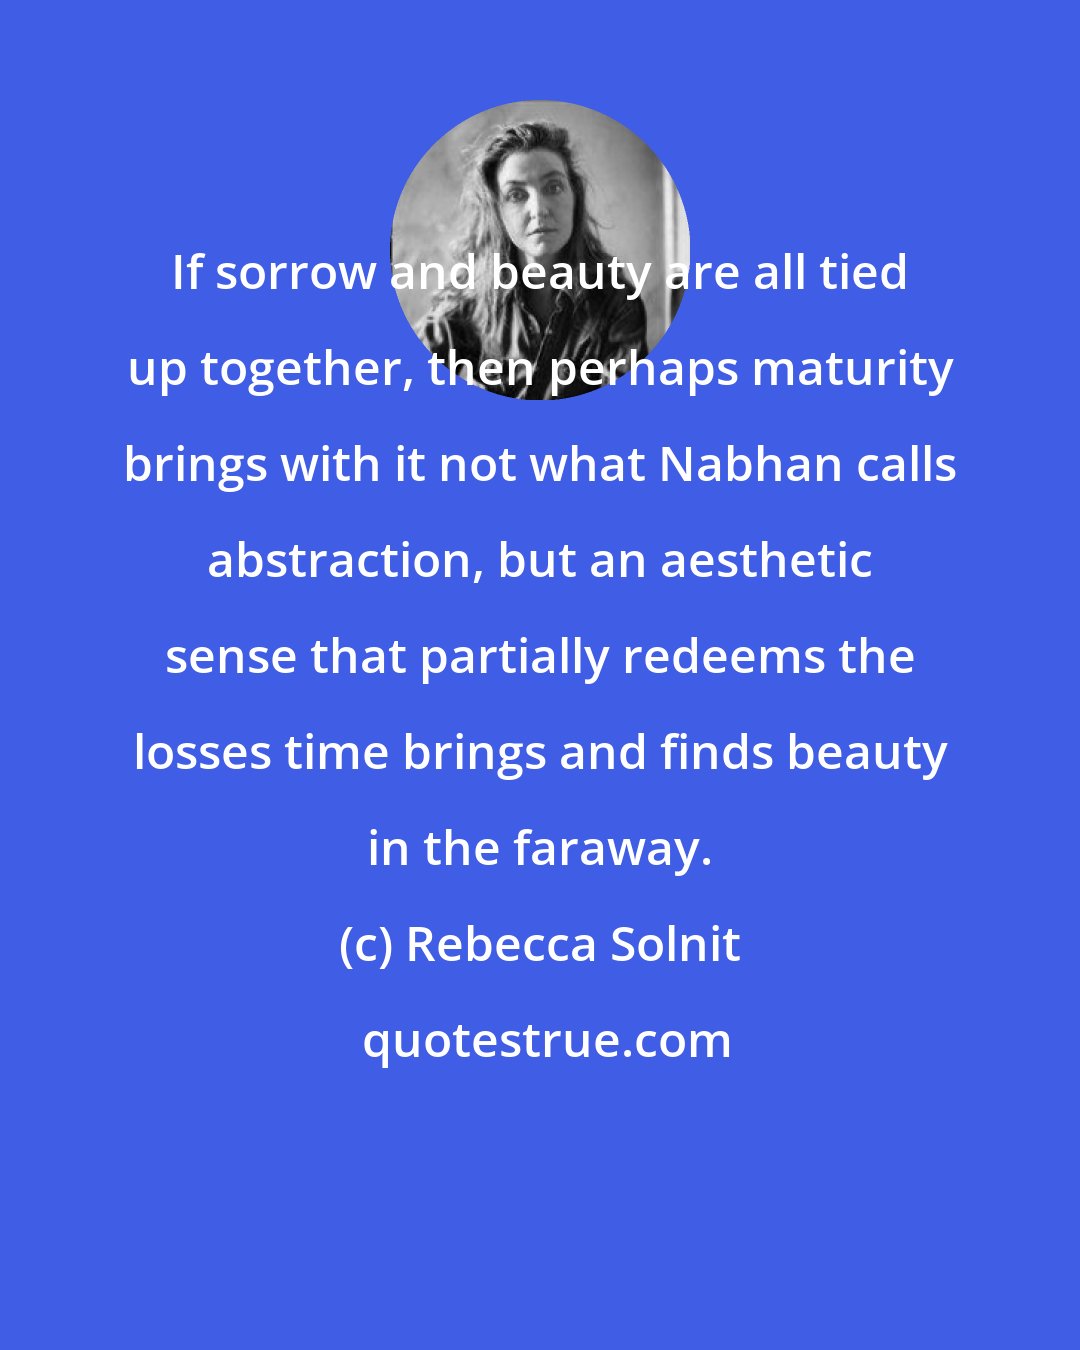 Rebecca Solnit: If sorrow and beauty are all tied up together, then perhaps maturity brings with it not what Nabhan calls abstraction, but an aesthetic sense that partially redeems the losses time brings and finds beauty in the faraway.